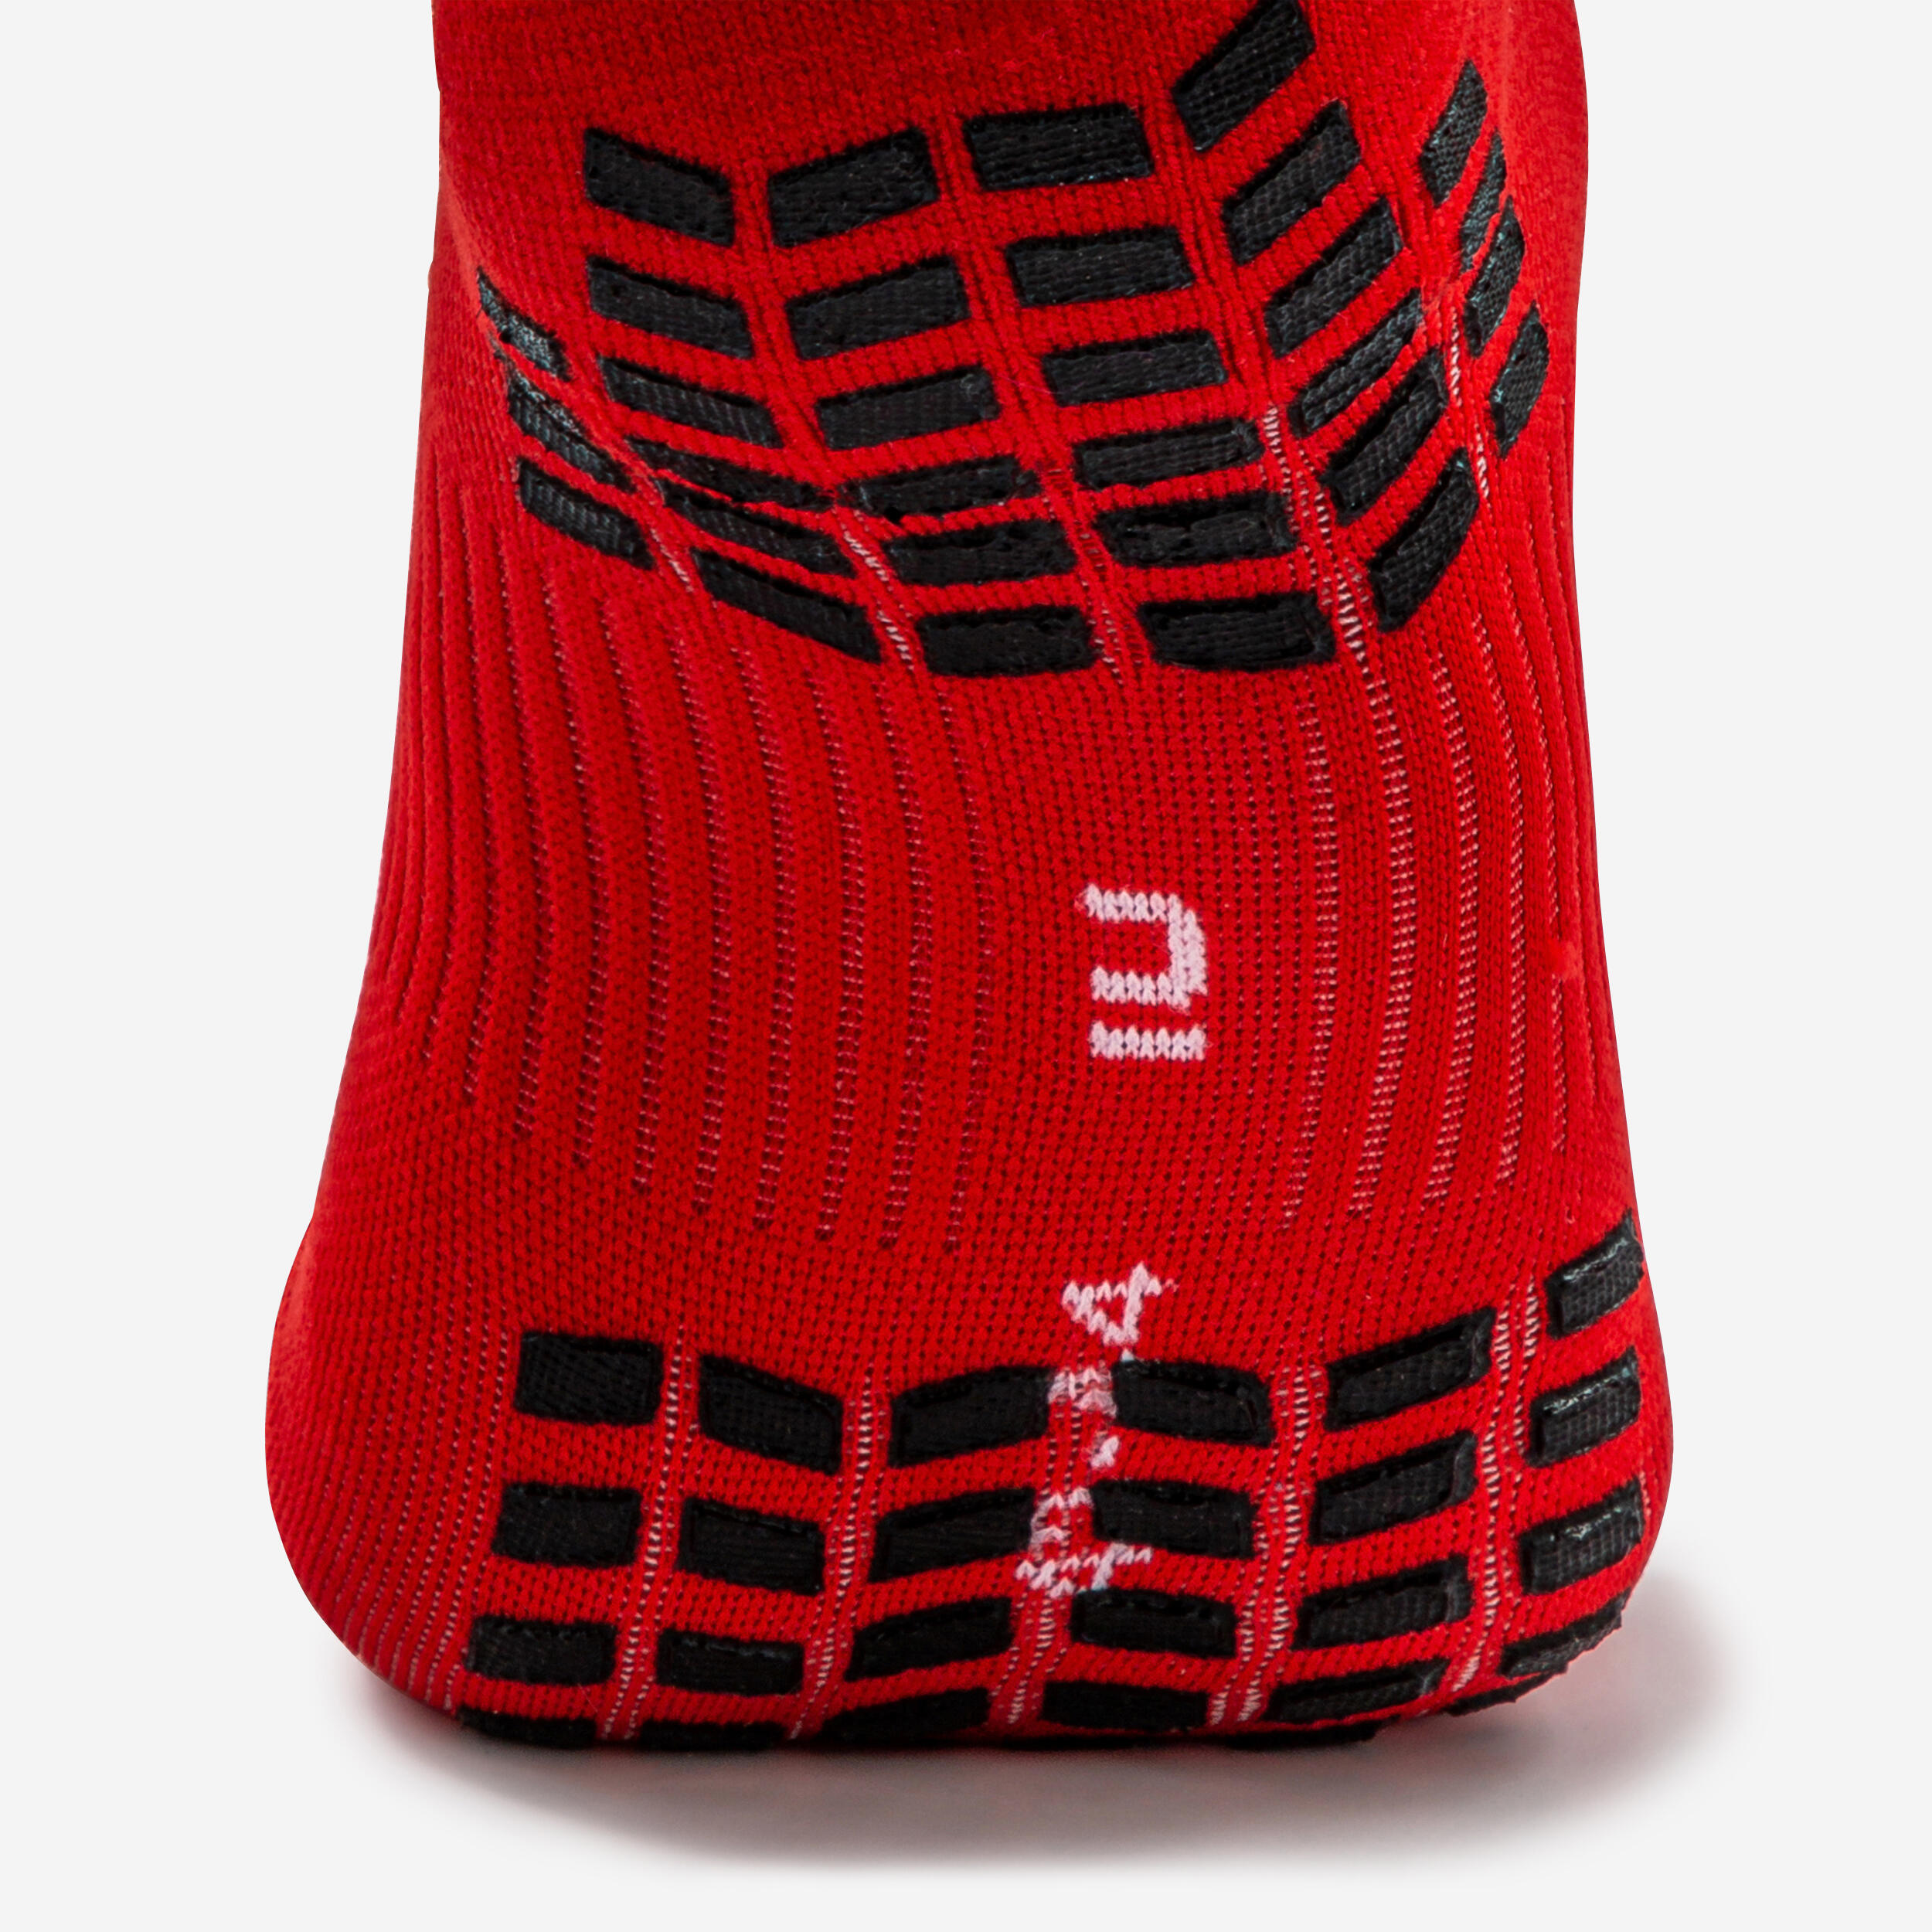 Adult High and Grippy Football Socks Viralto II - Red 3/5